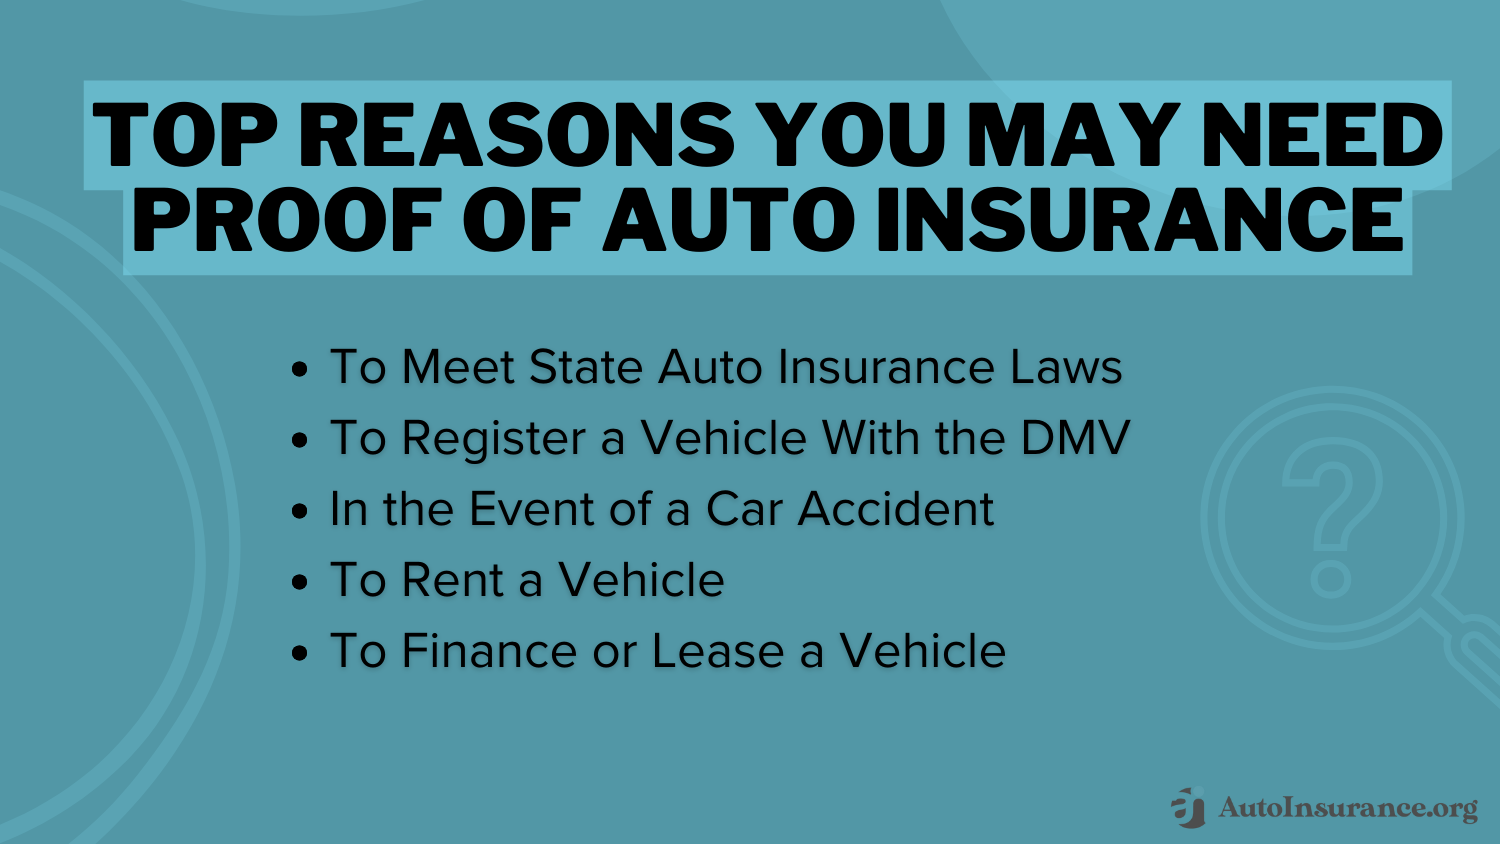 Top Reasons You May Need Proof of Auto Insurance: How to Get a Copy of Your Auto Insurance Card